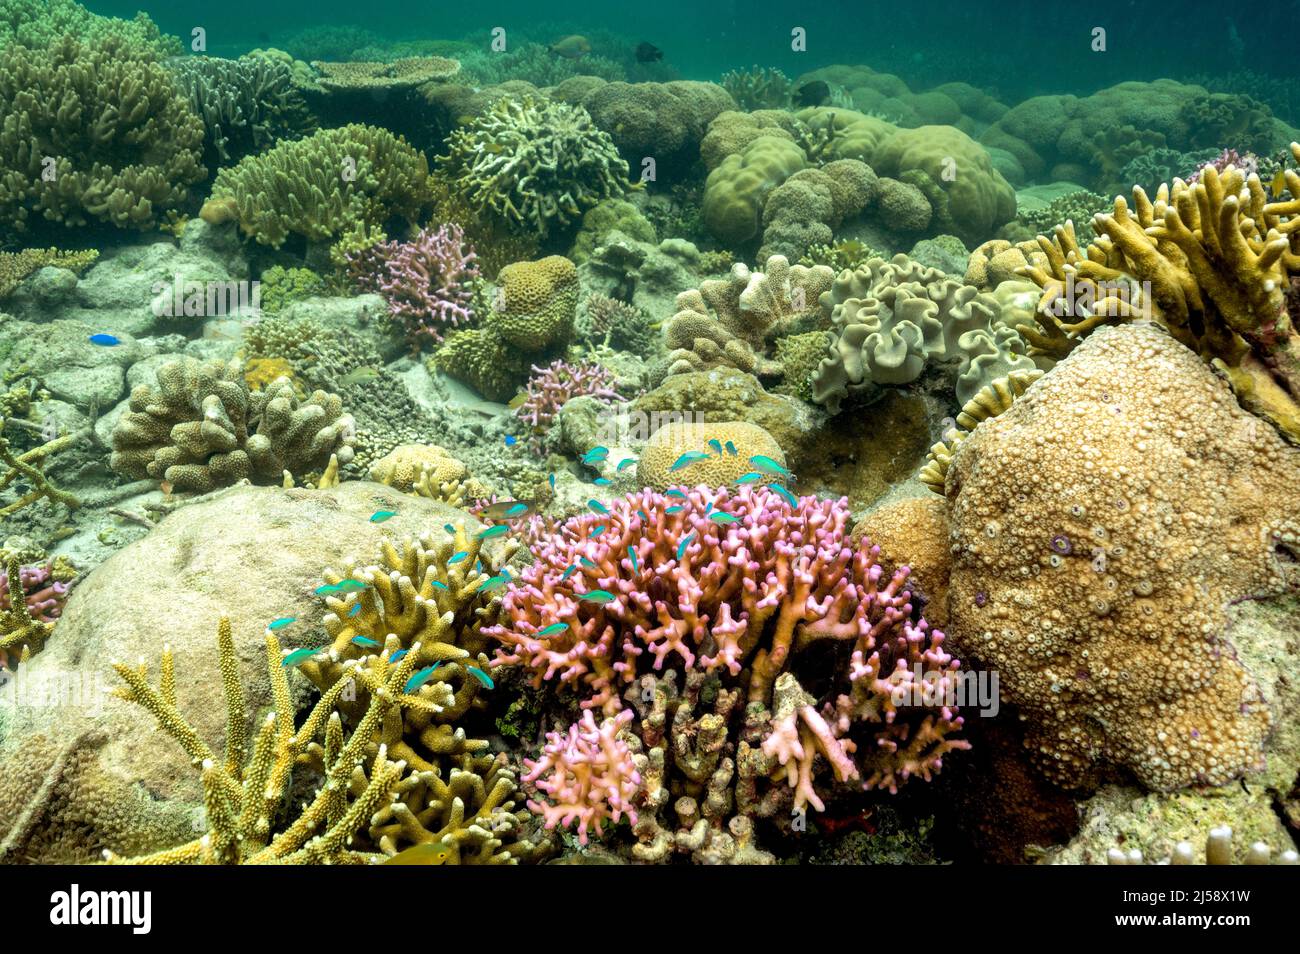 Stag horn hard corals in reef crest, Raja Ampat Indonesia. Stock Photo